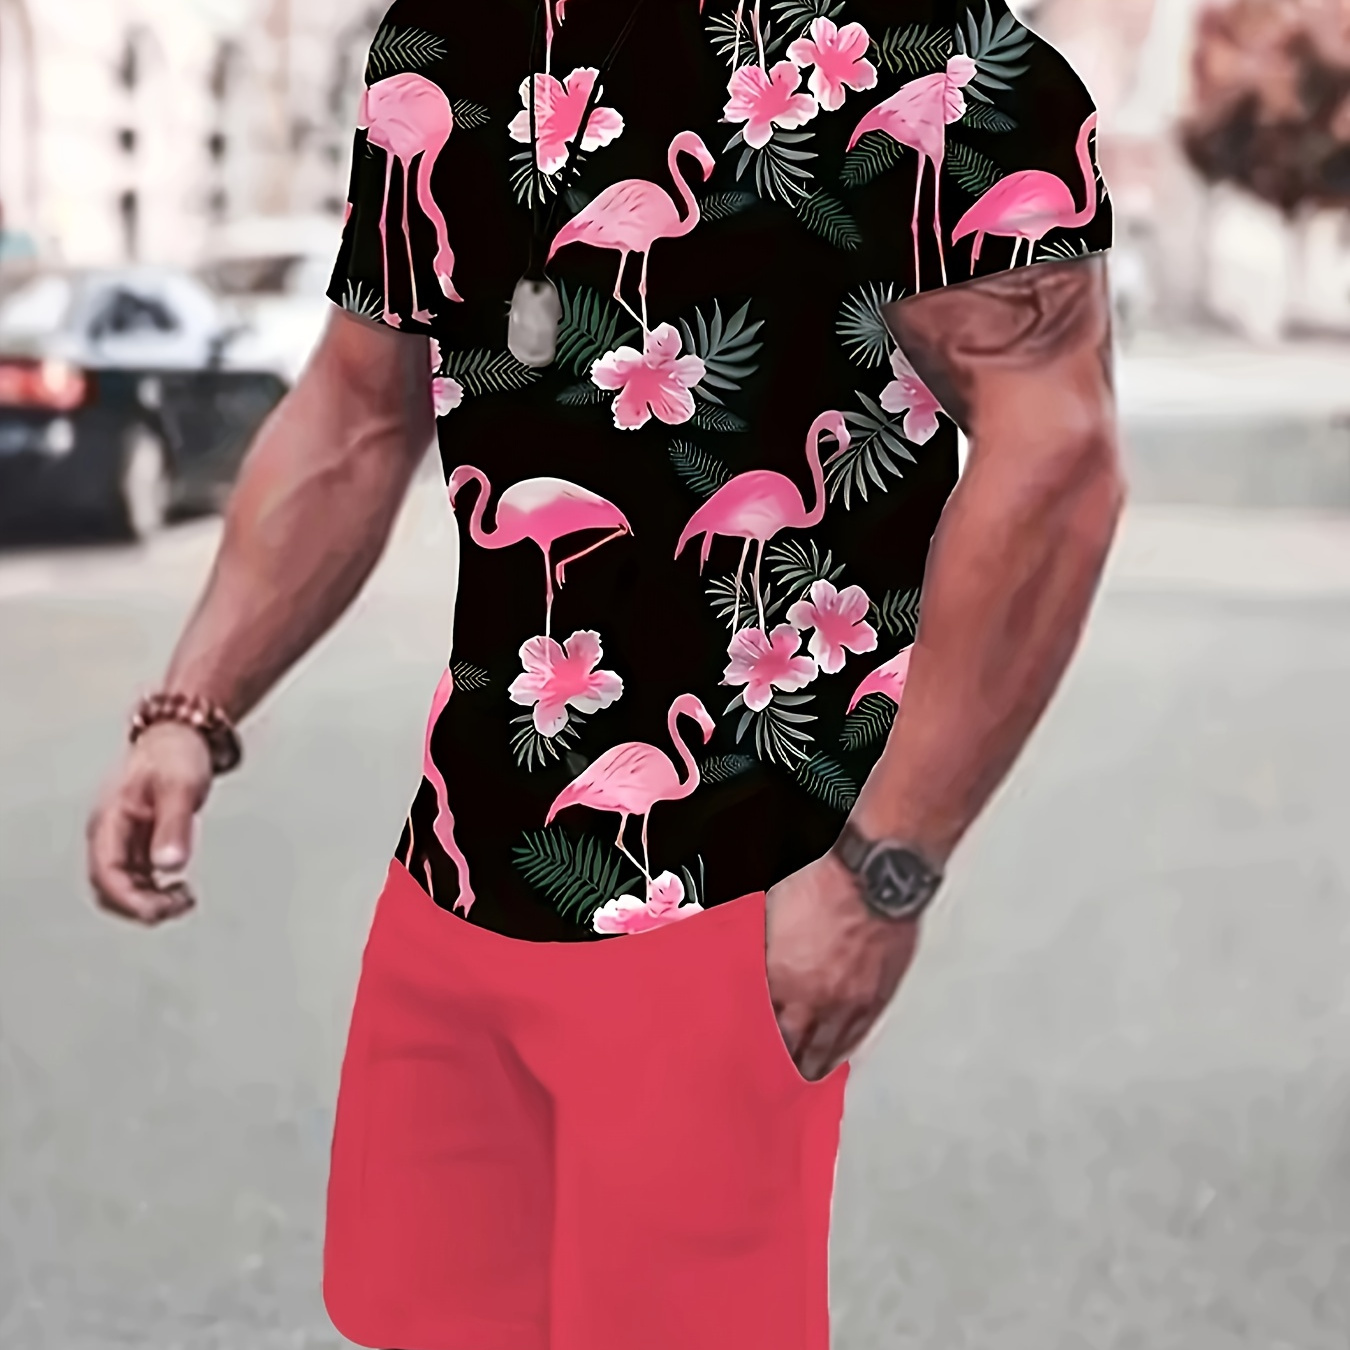 

The World's Most Popular Men's Leisure Fashion Printing Suit